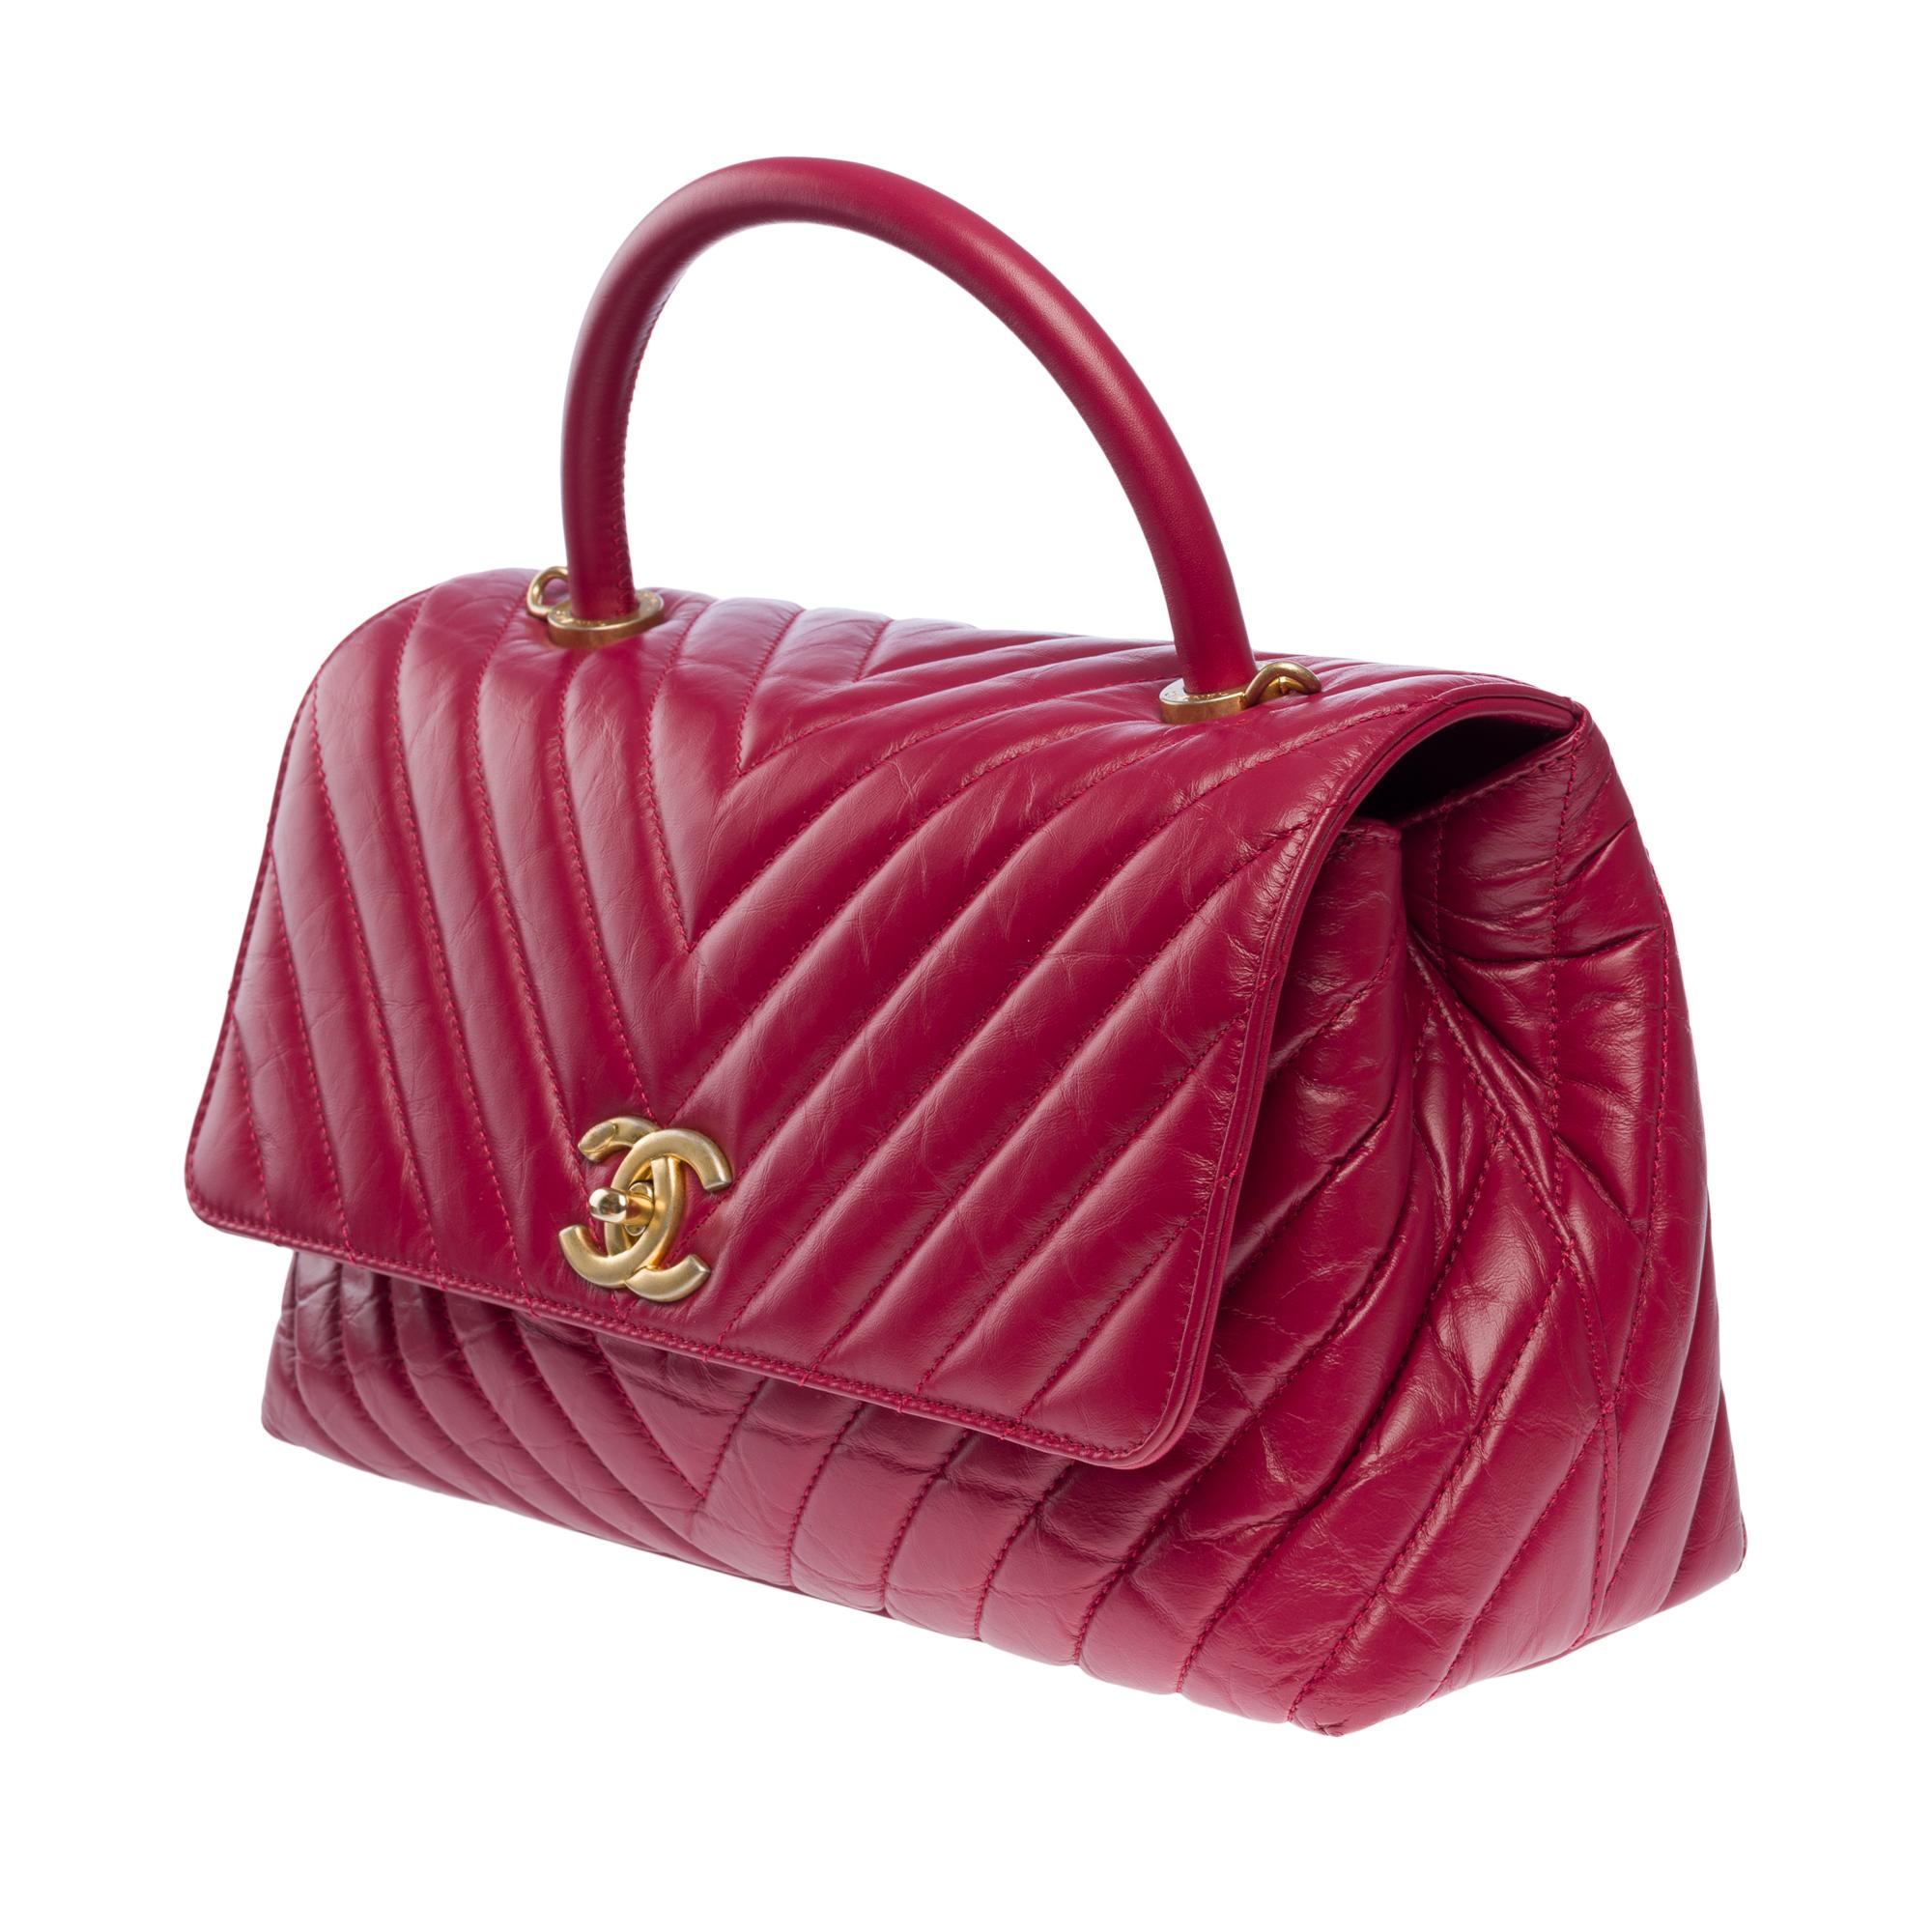 Women's Amazing Chanel Coco handle handbag in Red lambskin leather, MGHW For Sale